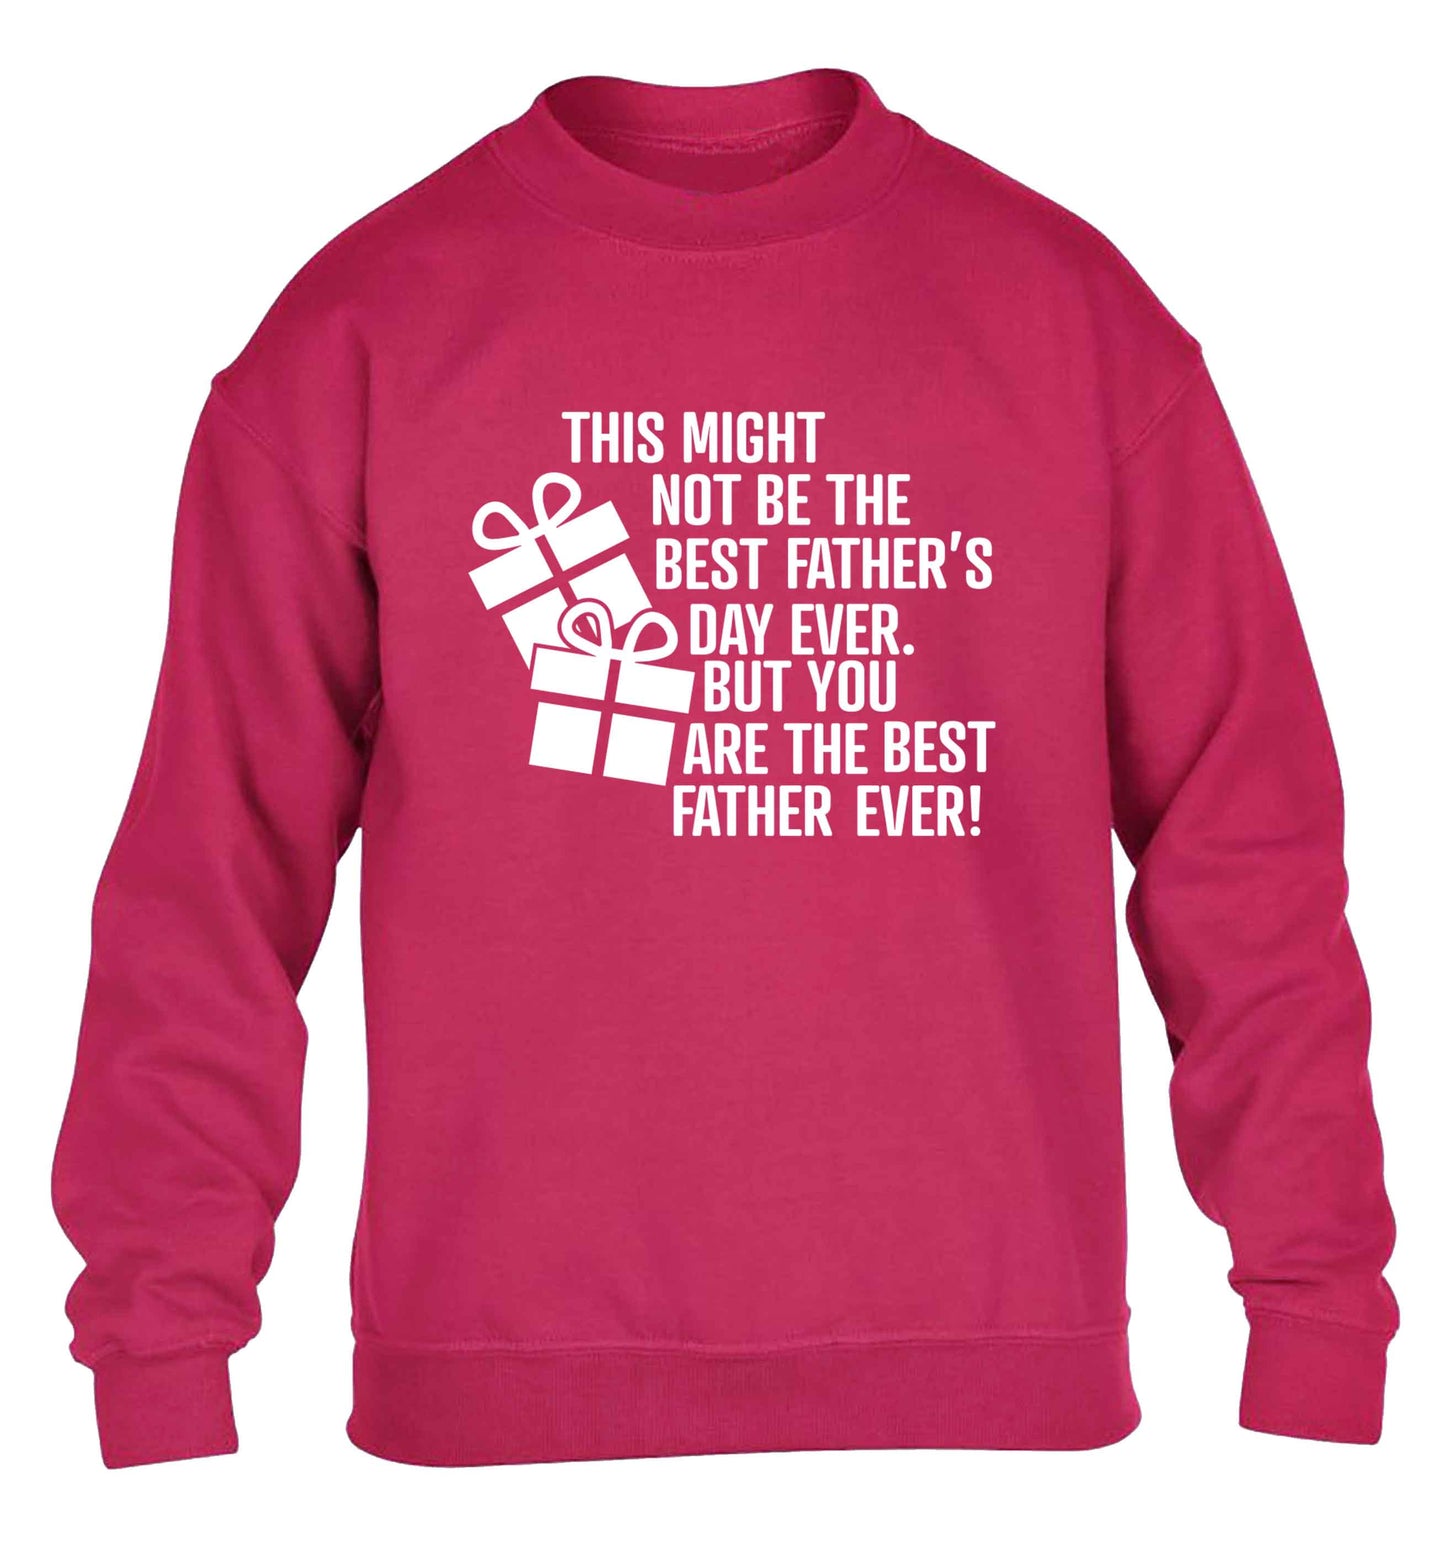 It might not be the best Father's Day ever but you are the best father ever! children's pink sweater 12-13 Years